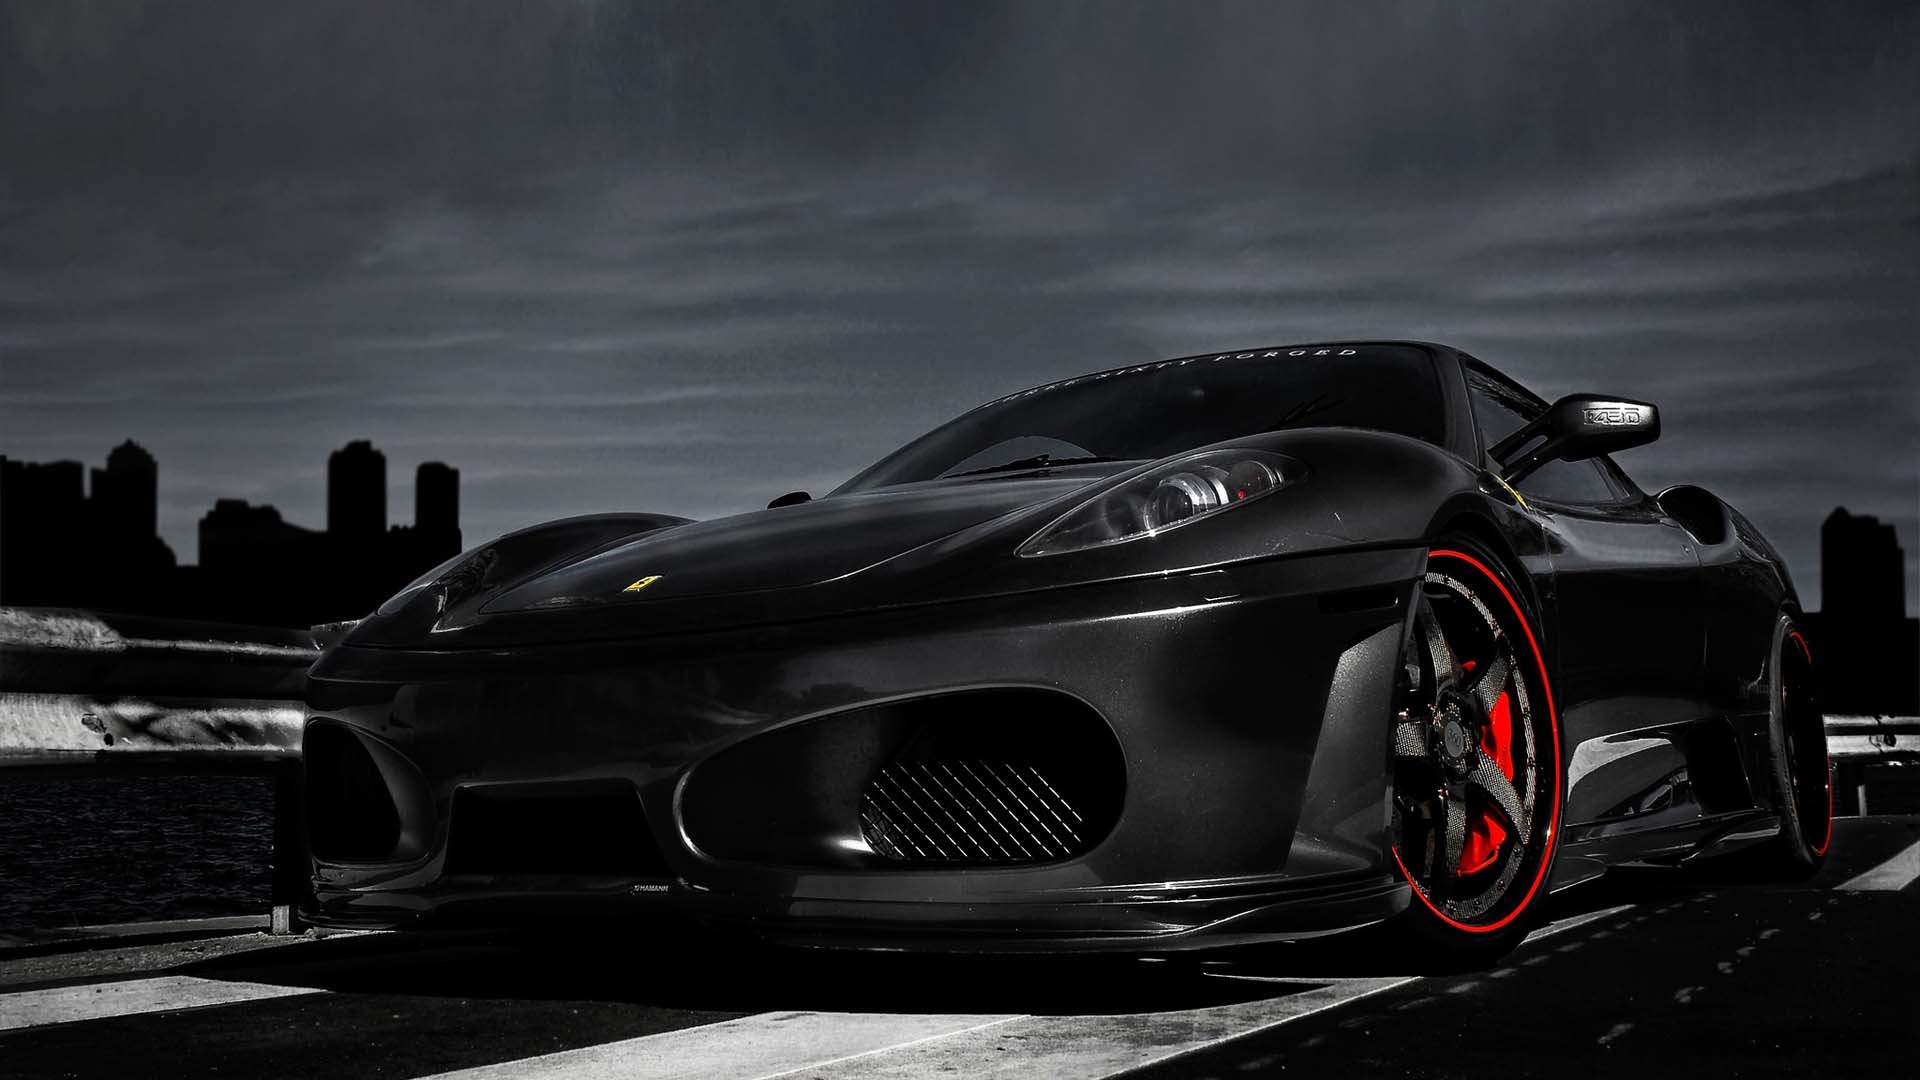 Coolest Collection of Ferrari Wallpaper amp Backgrounds In HD